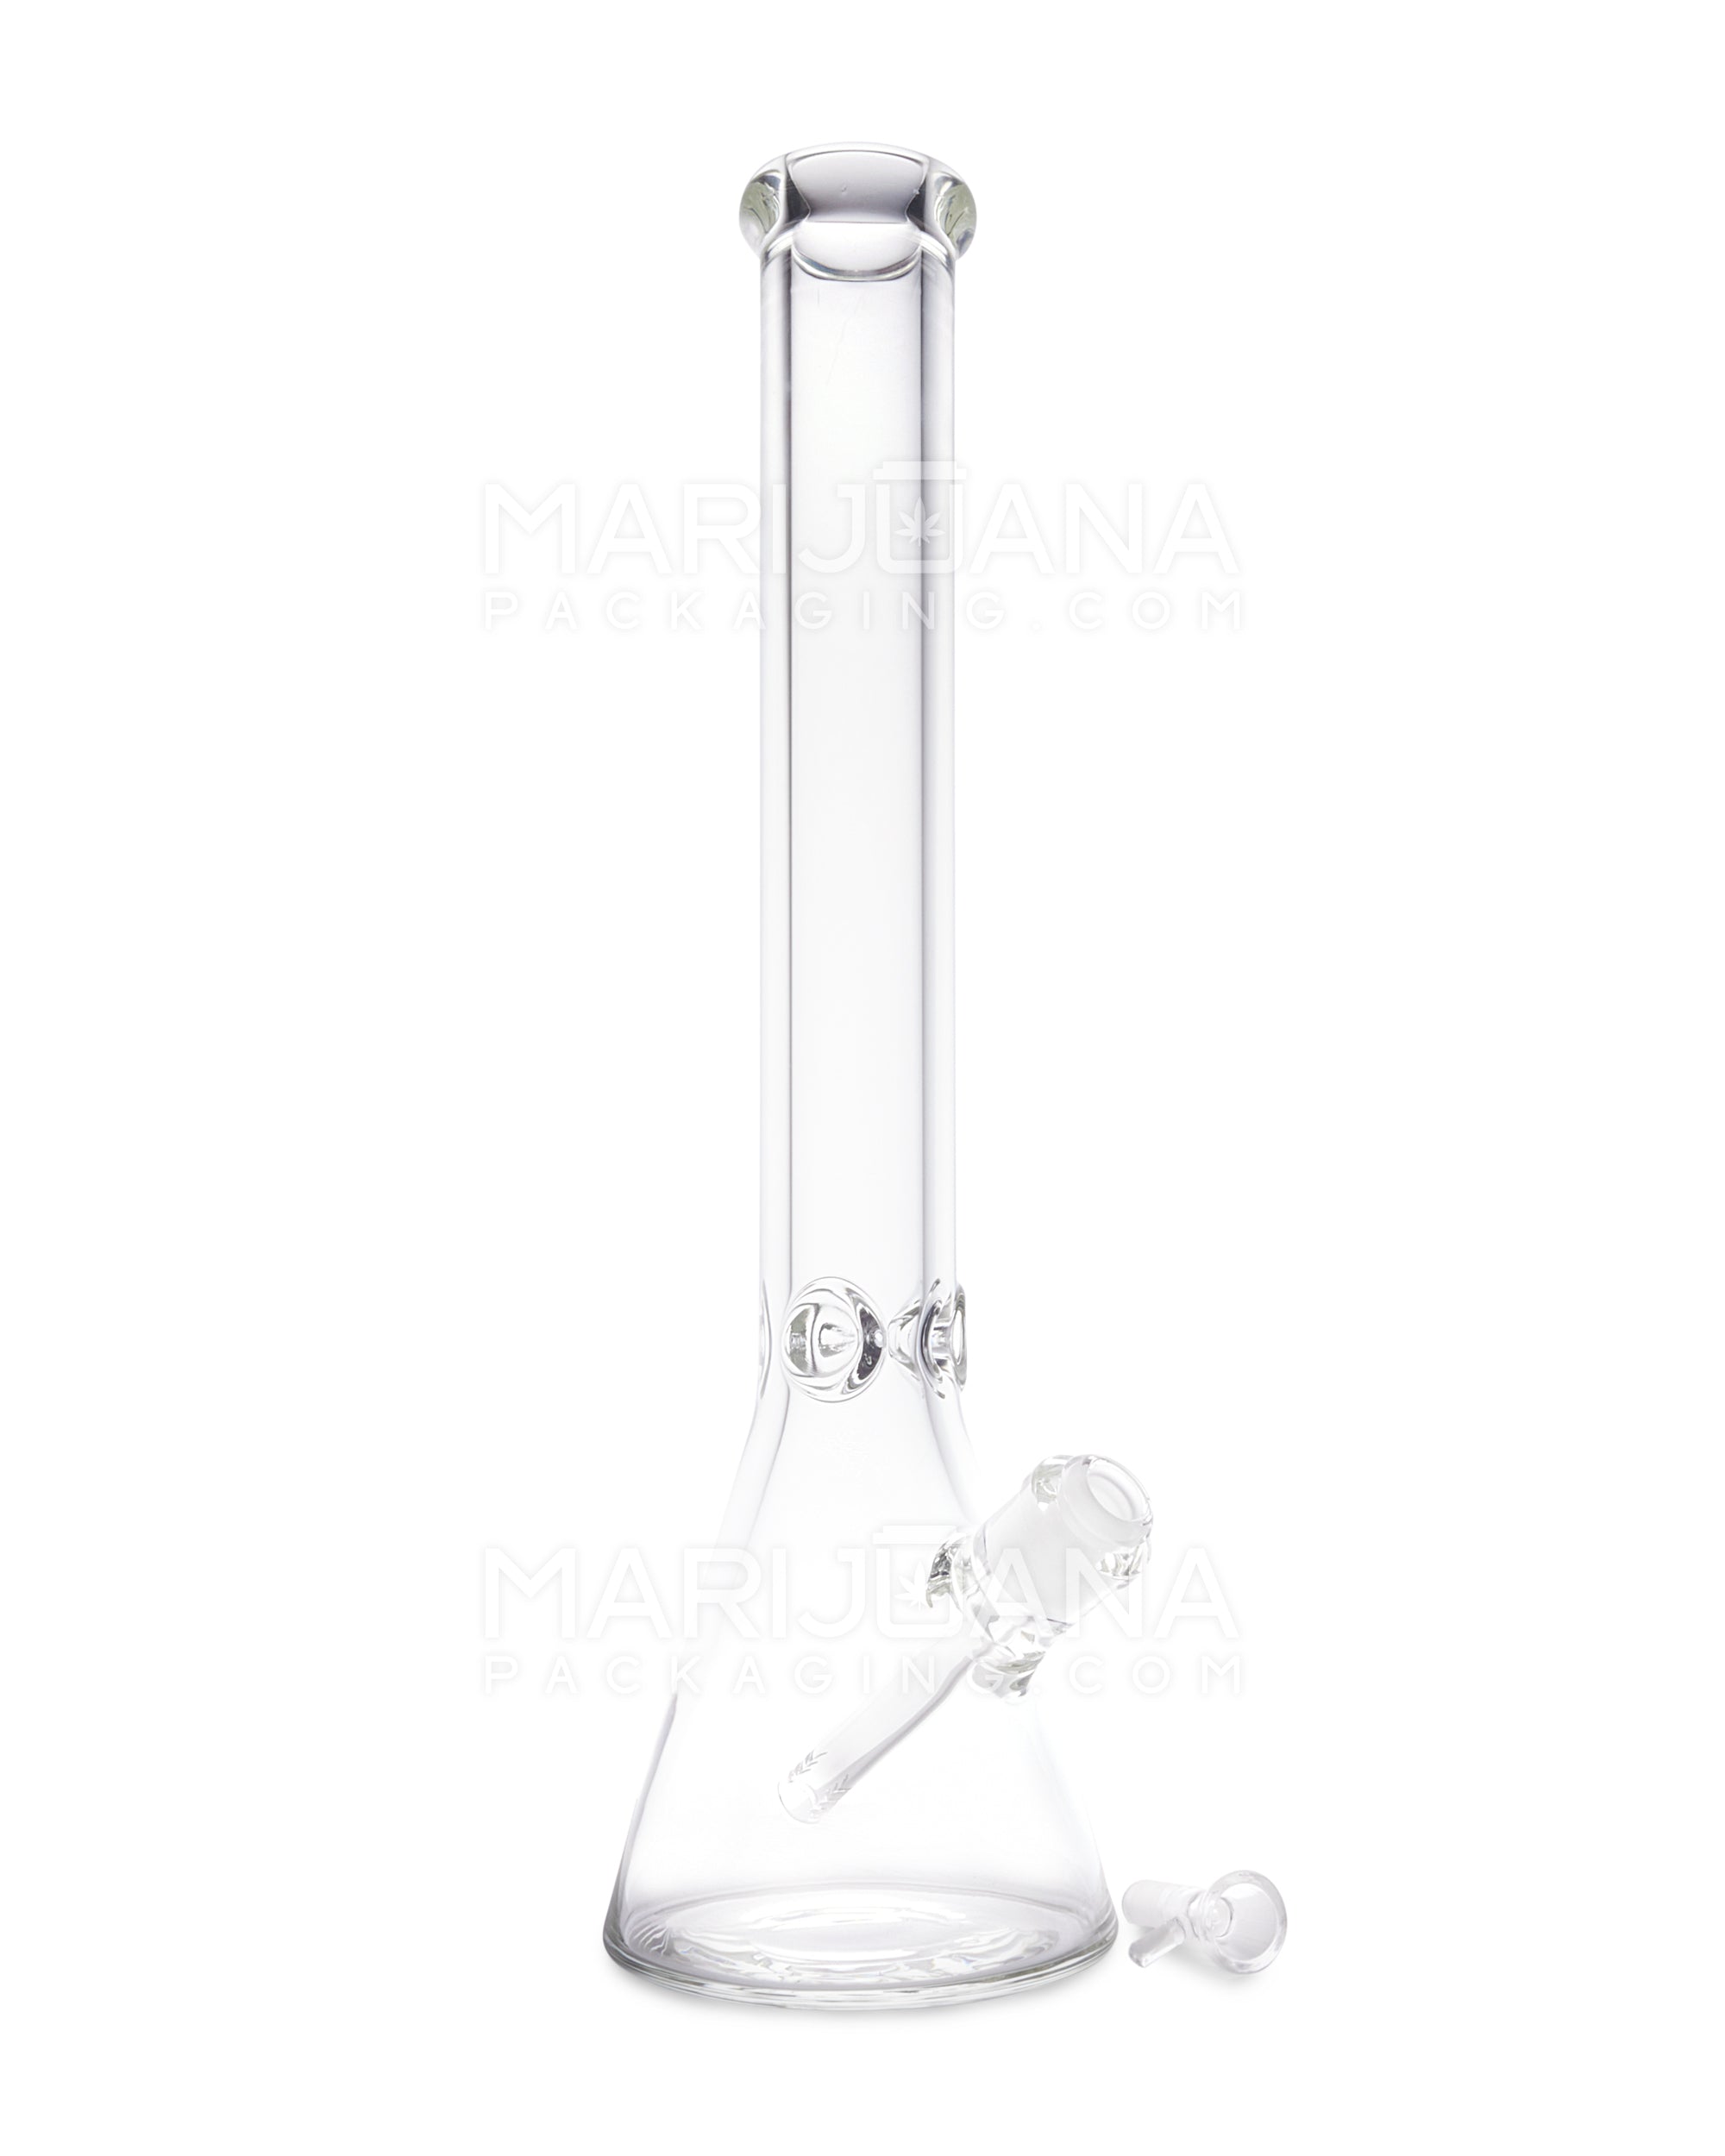 USA Glass | Straight Neck Heavy Thick Glass Beaker Water Pipe w/ Ice Catcher | 18in Tall - 14mm Bowl - Clear